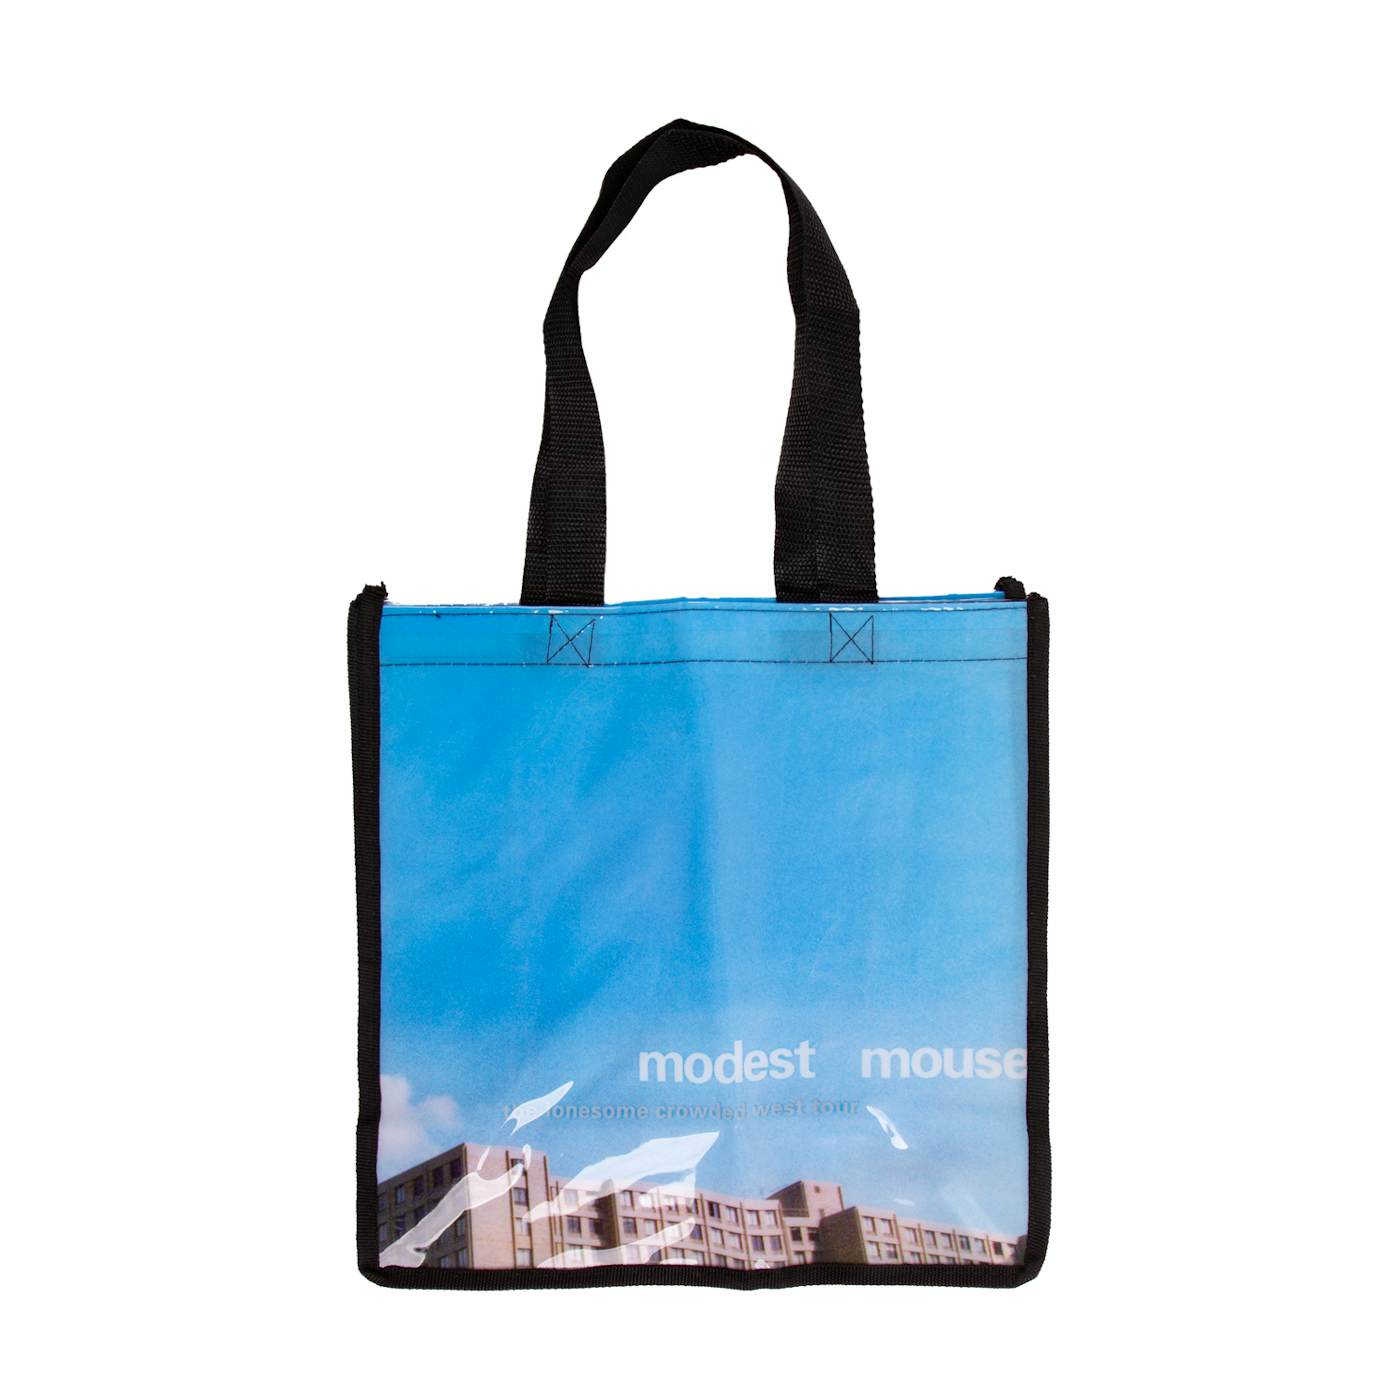 Modest Mouse LCW Tote Bag